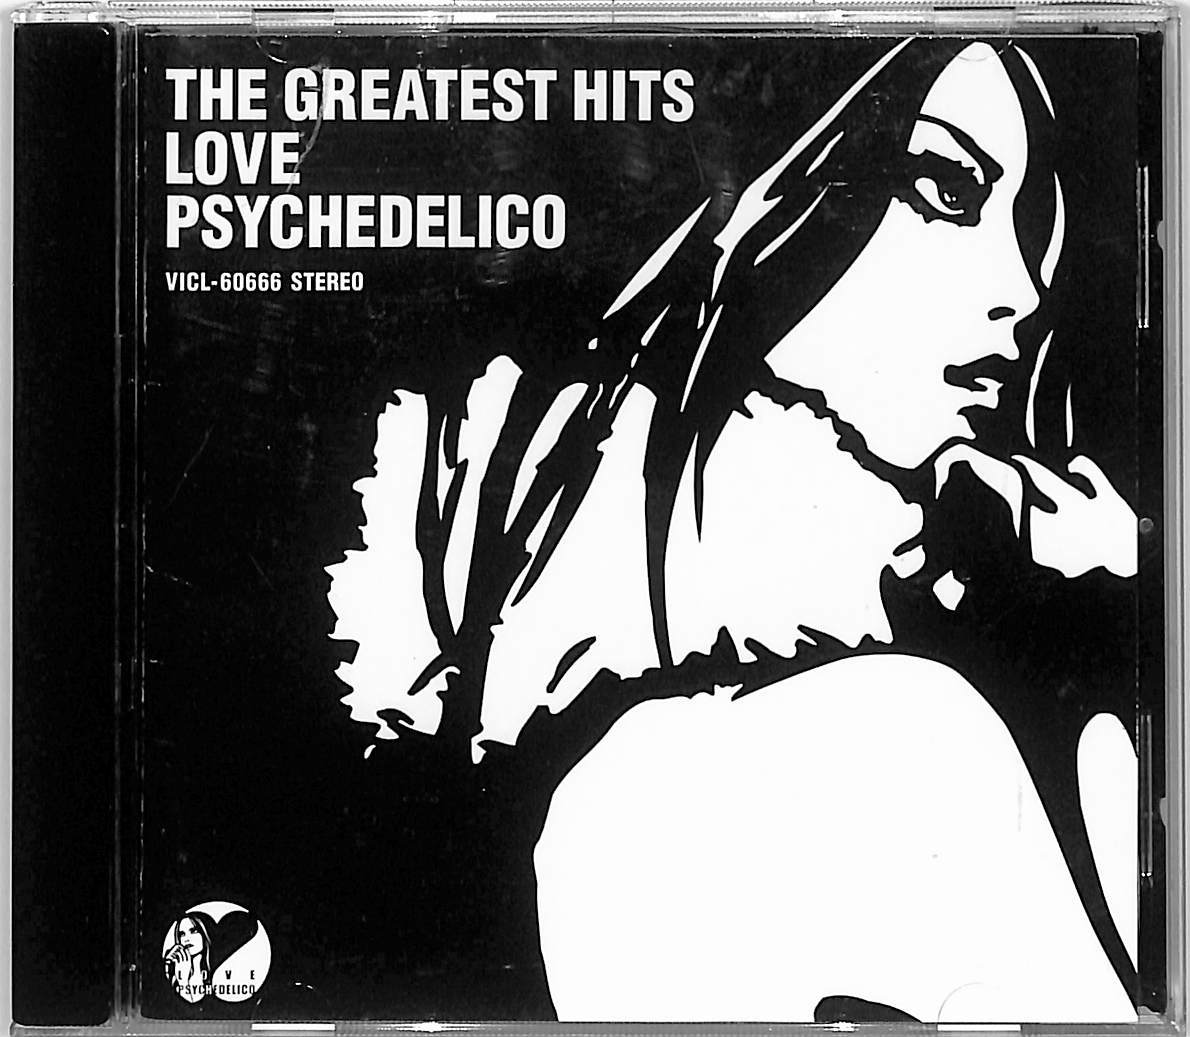 CD■LOVE PSYCHEDELICO ラブ・サイケデリコ■THE GREATEST HITS■VICL-60666_画像1